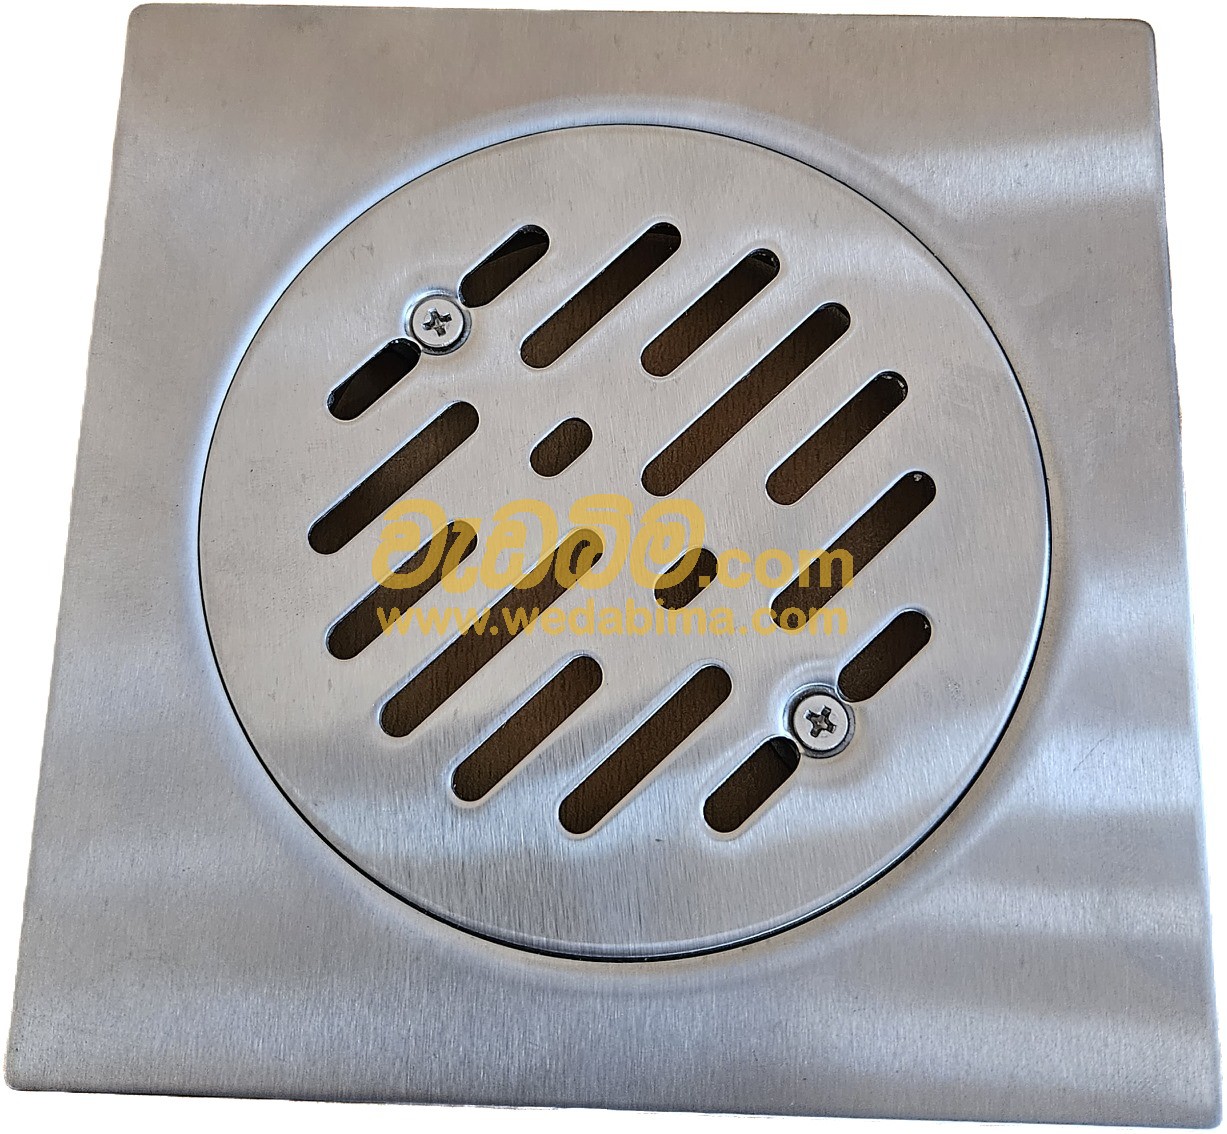 Cover image for Stainless Steel Floor Drain Covers Price in Colombo